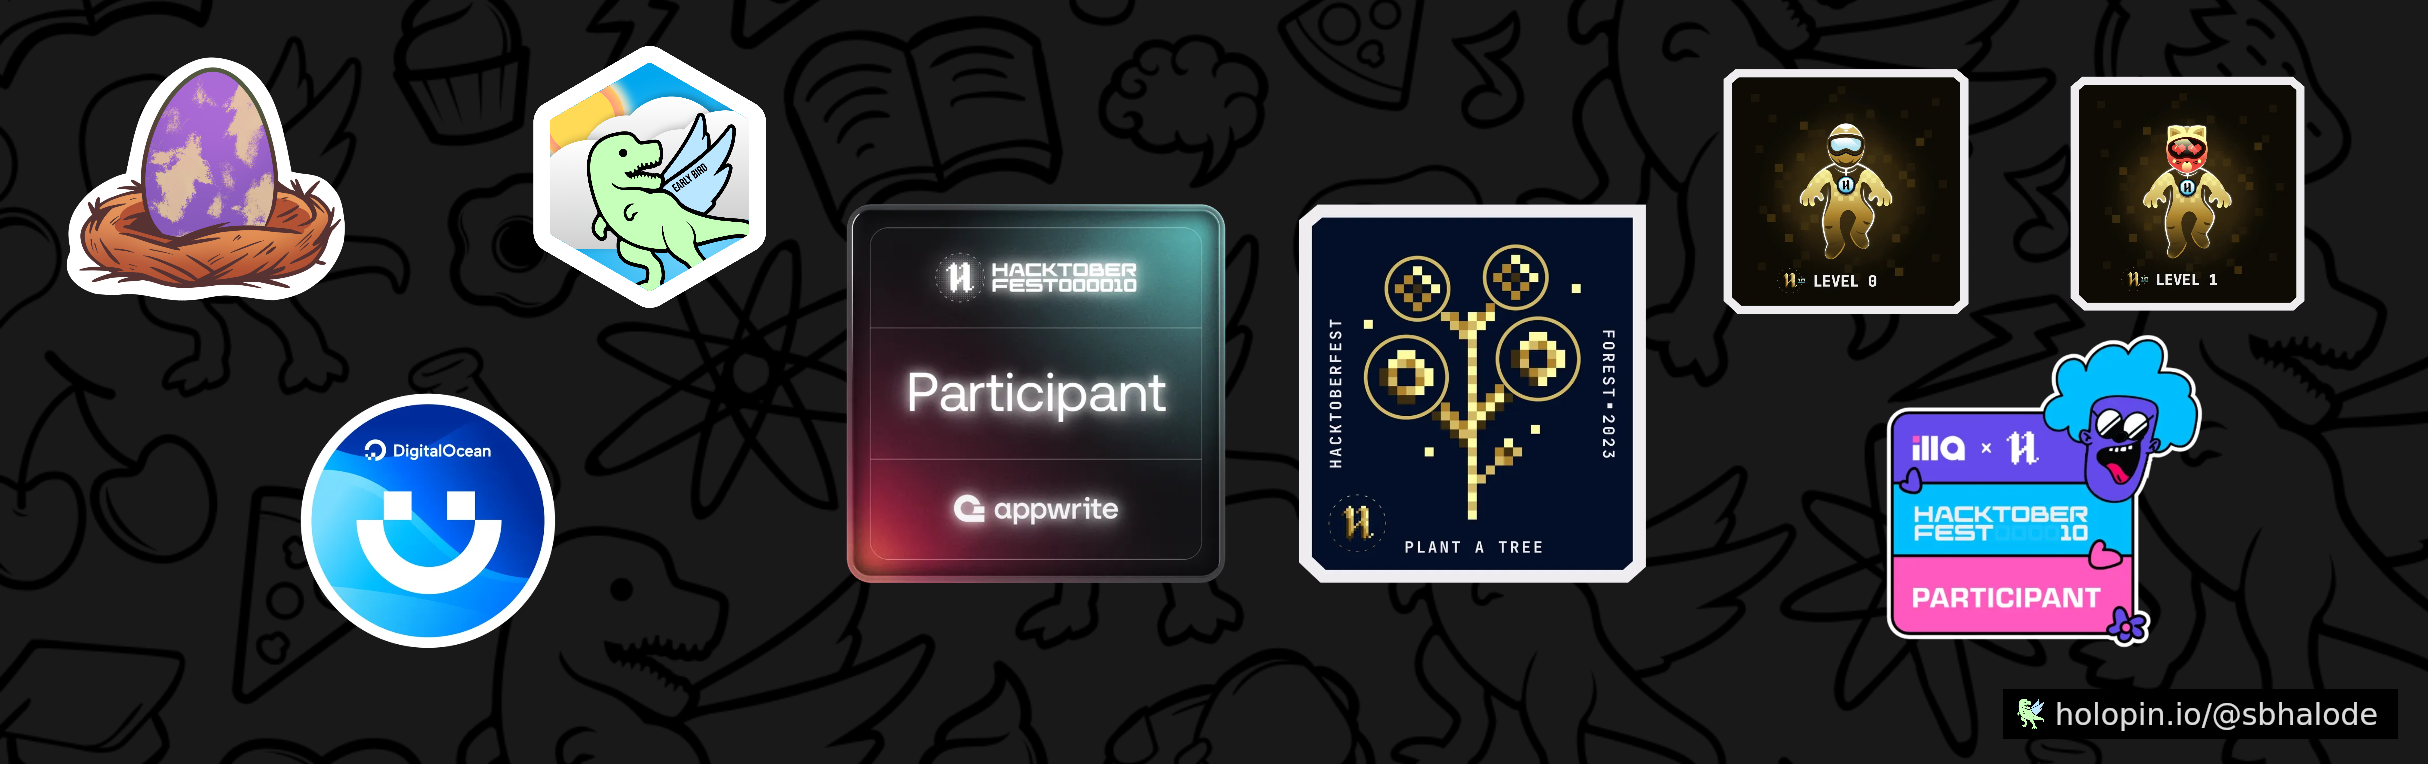 An image of @sbhalode's Holopin badges, which is a link to view their full Holopin profile